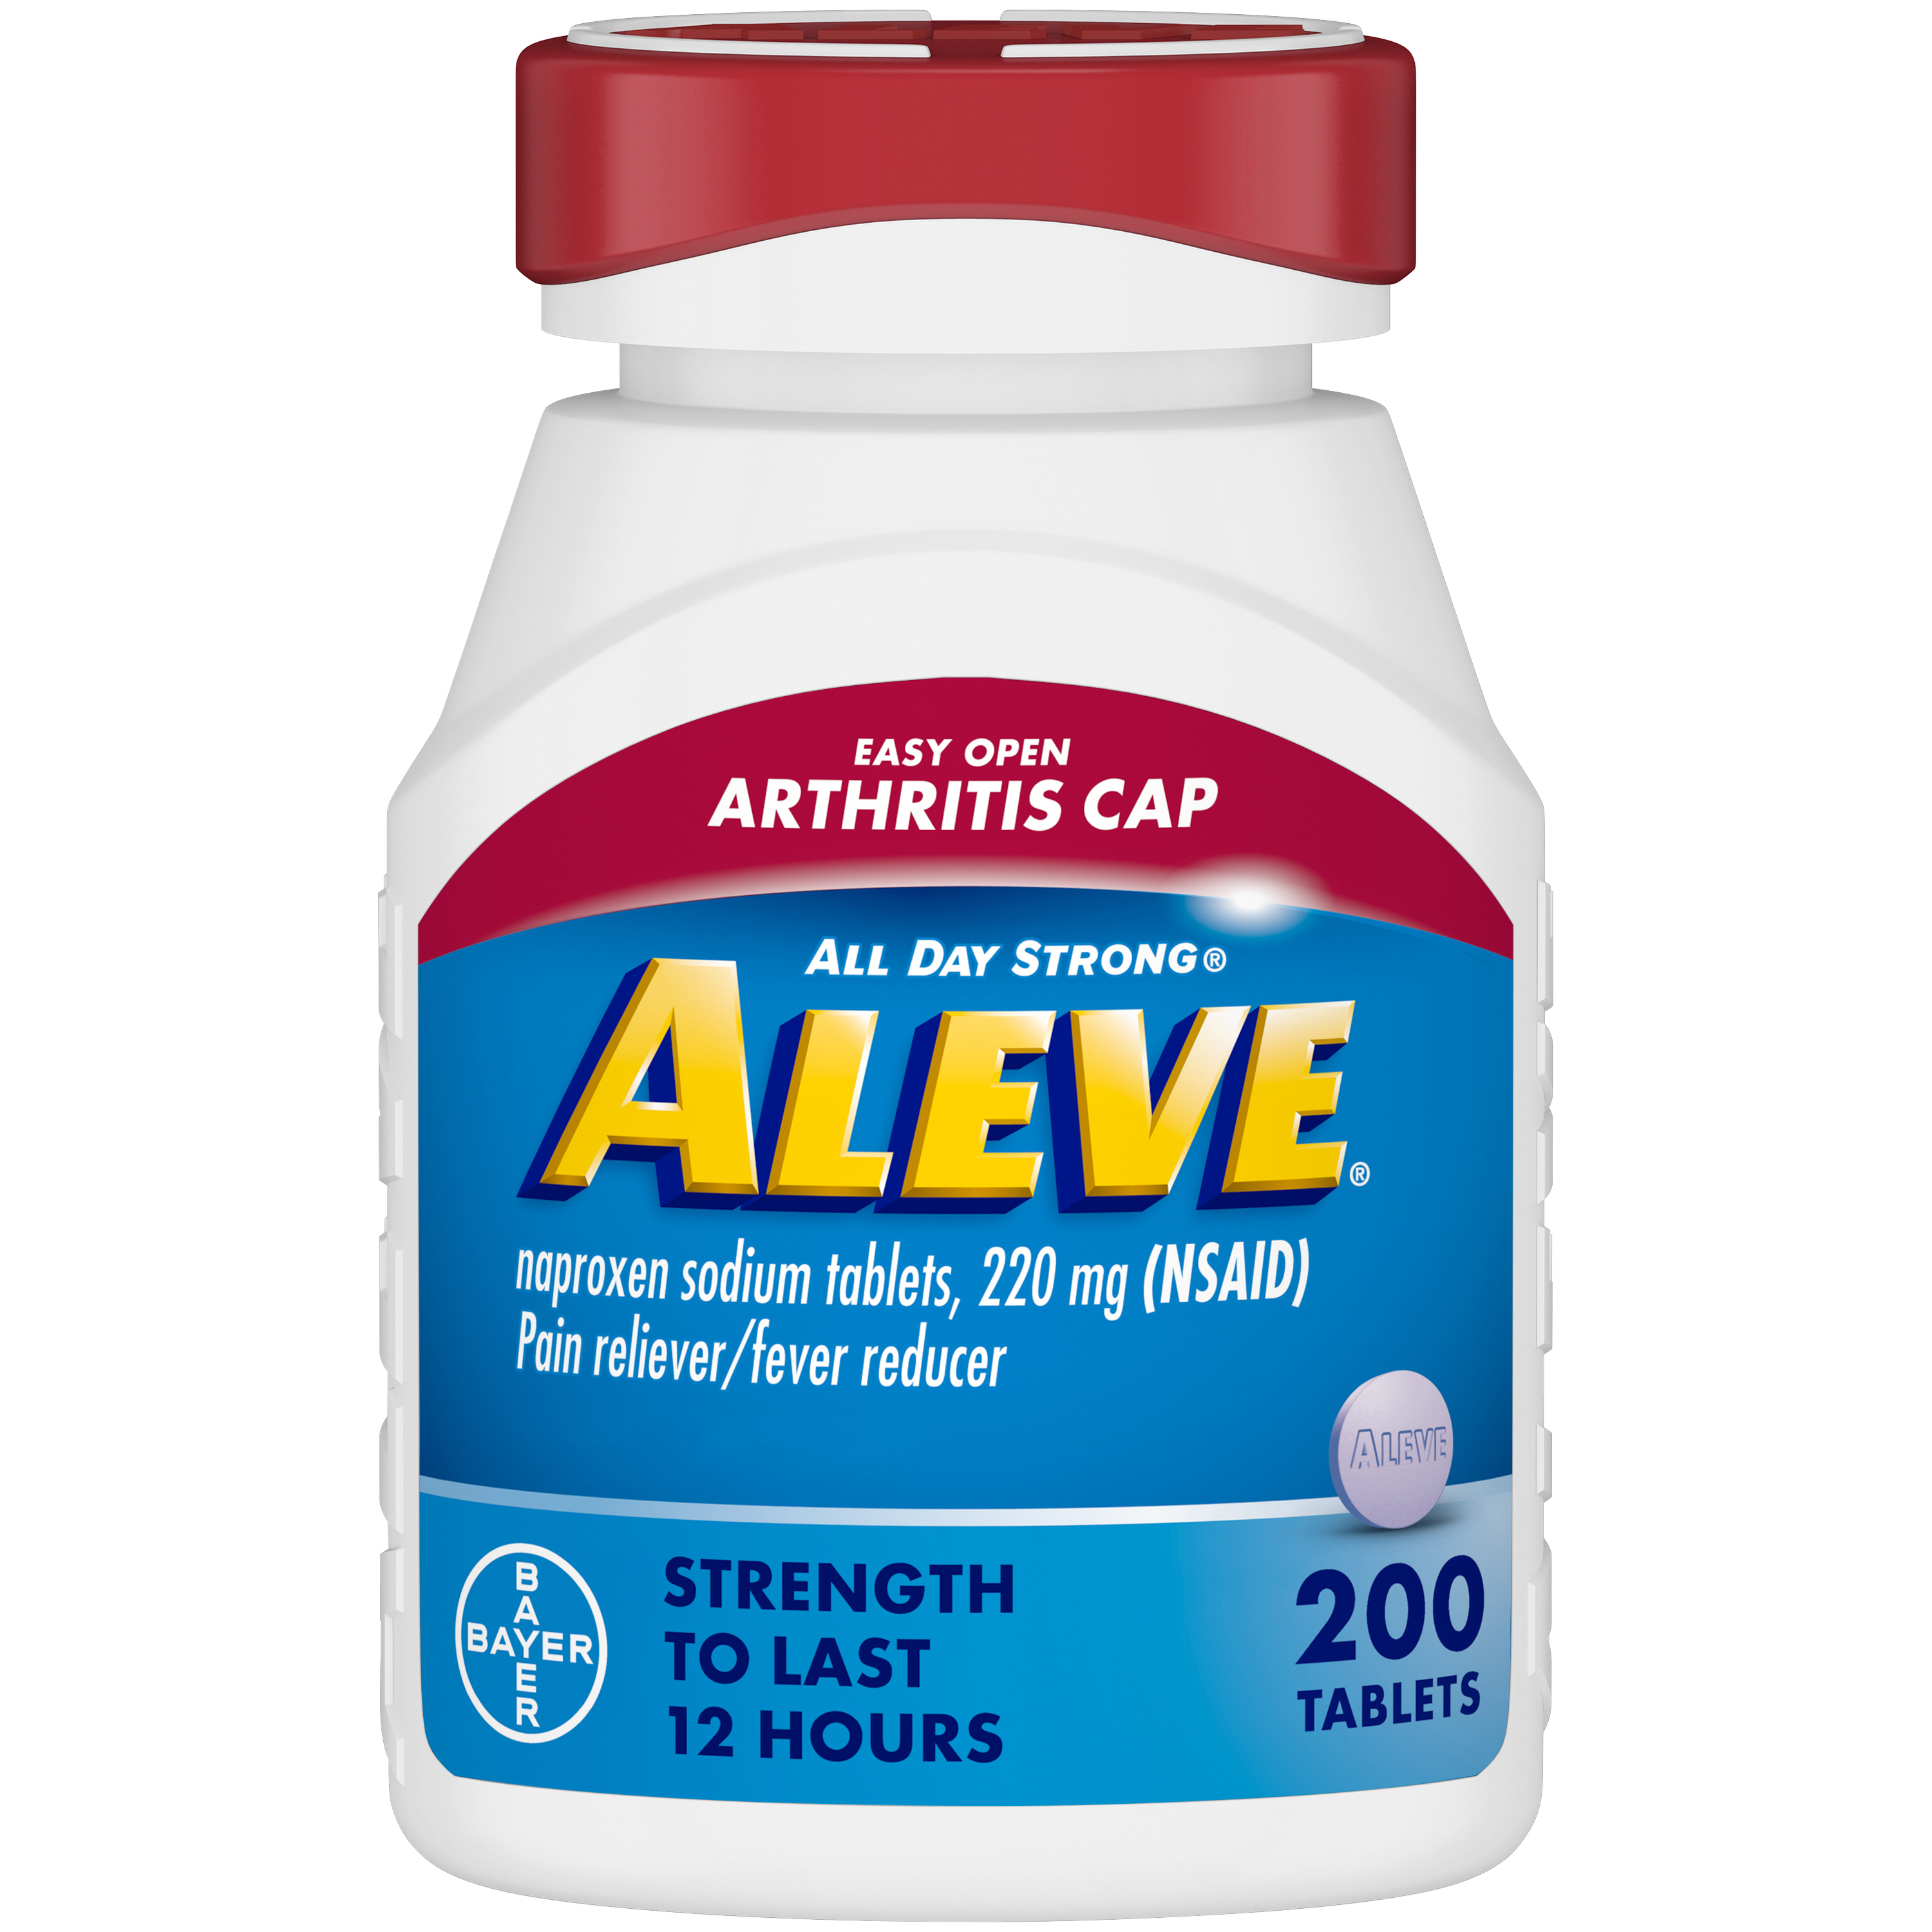 Aleve Tablets Easy Open Arthritis Cap Naproxen Sodium Pain Reliever, 200 Count - image 2 of 14